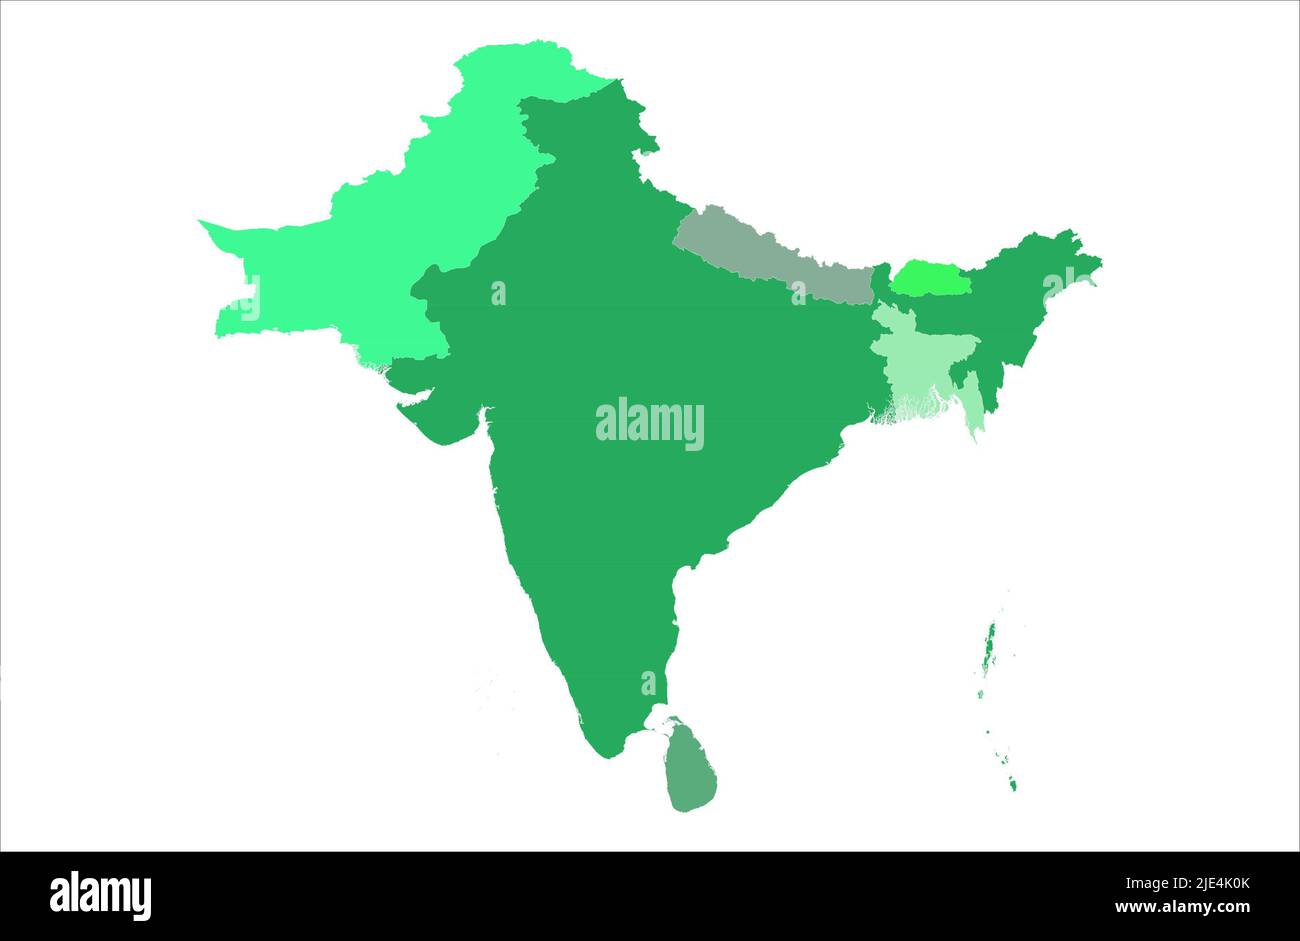 Beautiful South Asian countries green gradient vector map illustration on white background Stock Photo